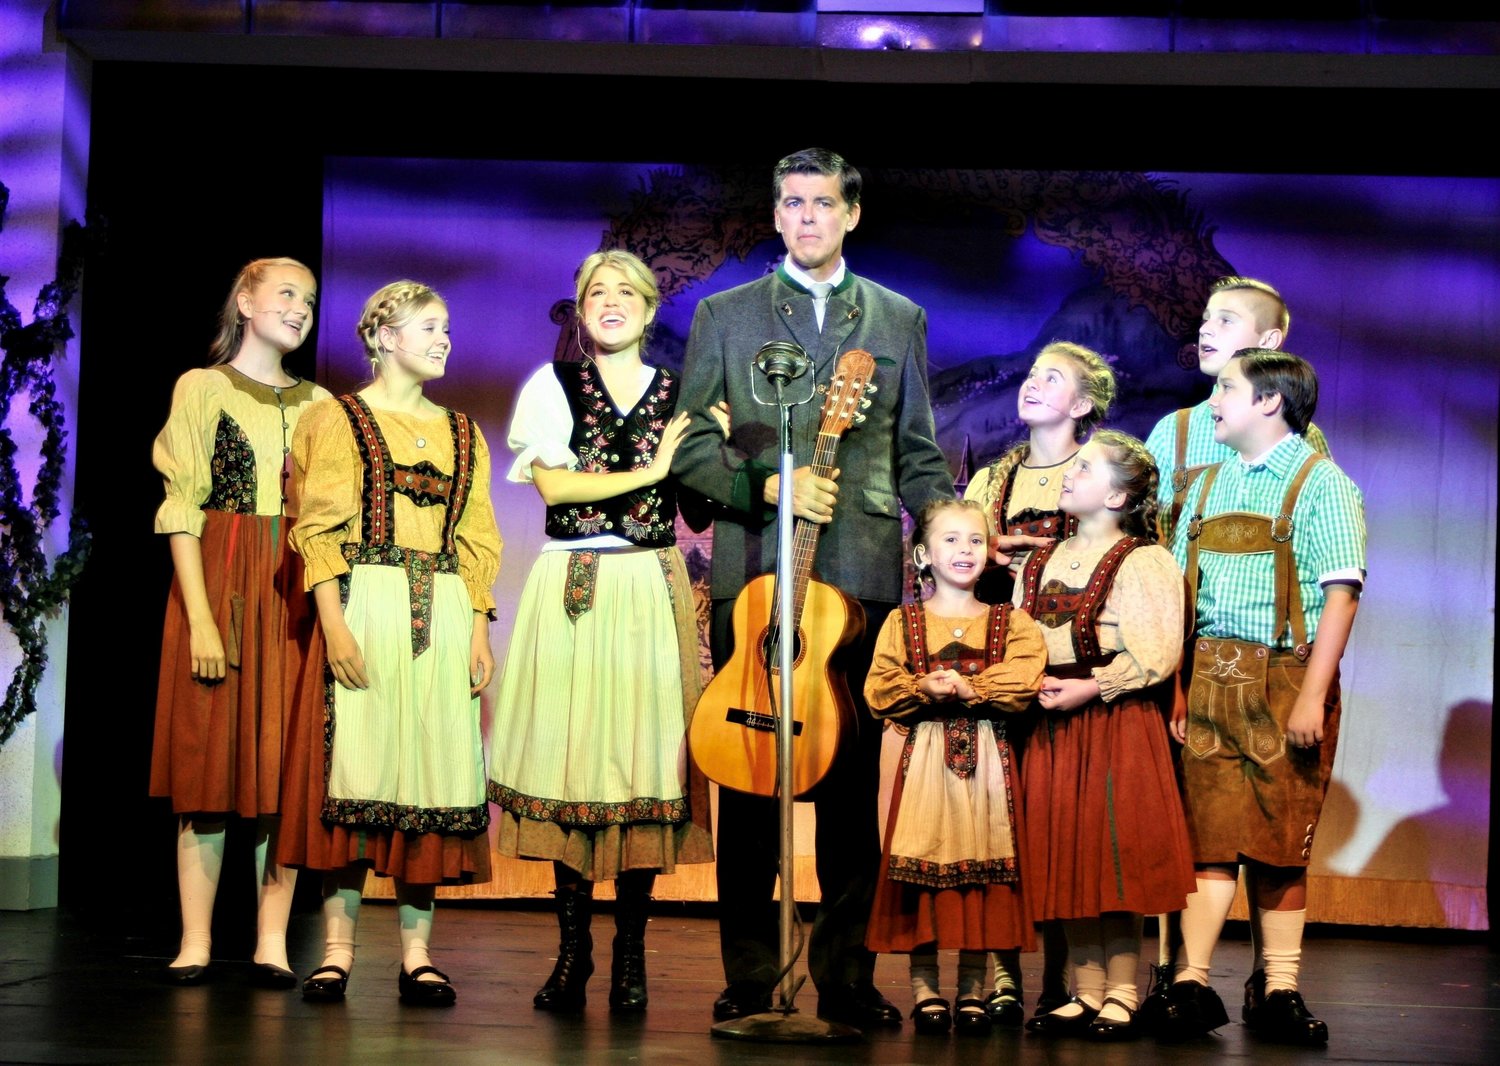 “The Sound of Music” runs through Sept. 26 at The Alhambra Theatre & Dining in Jacksonville.